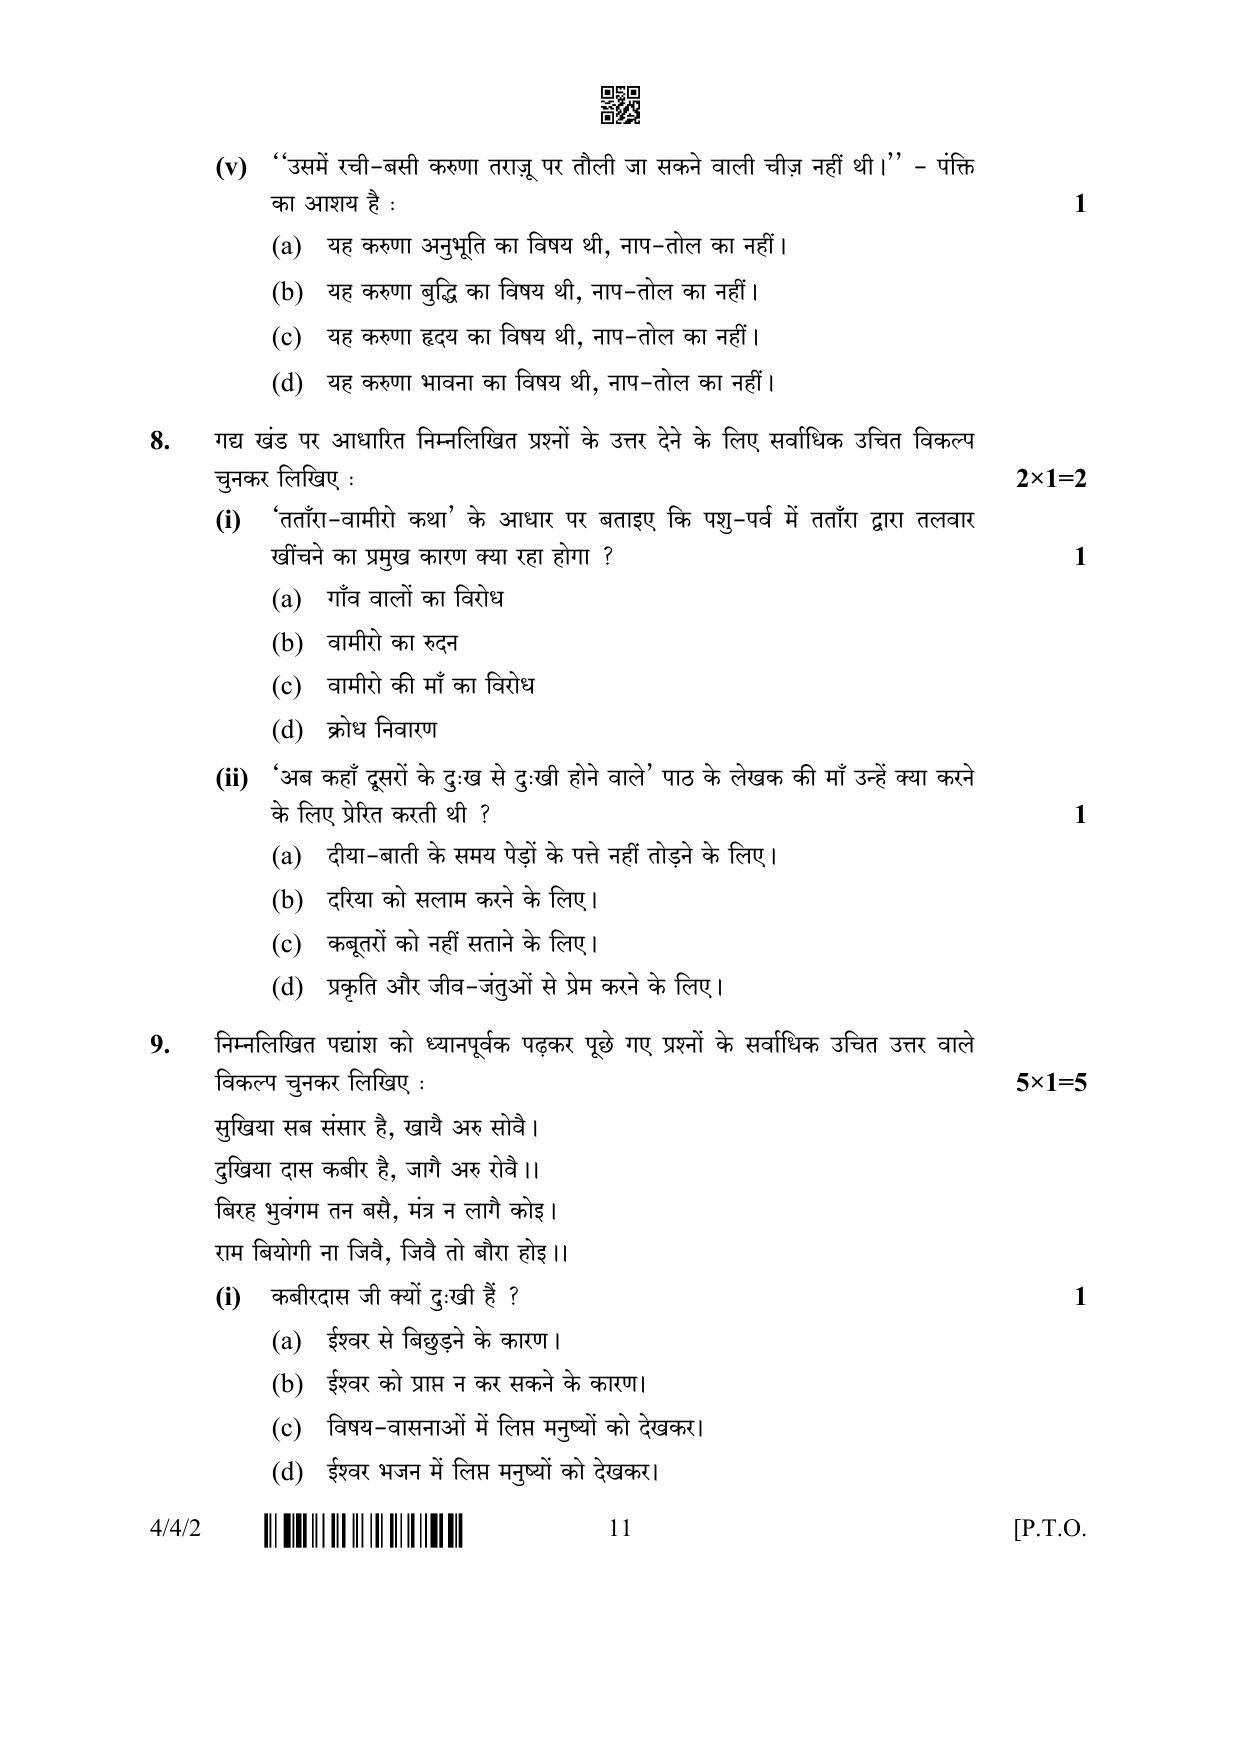 CBSE Class 10 4-4-2 Hindi B 2023 Question Paper - Page 11